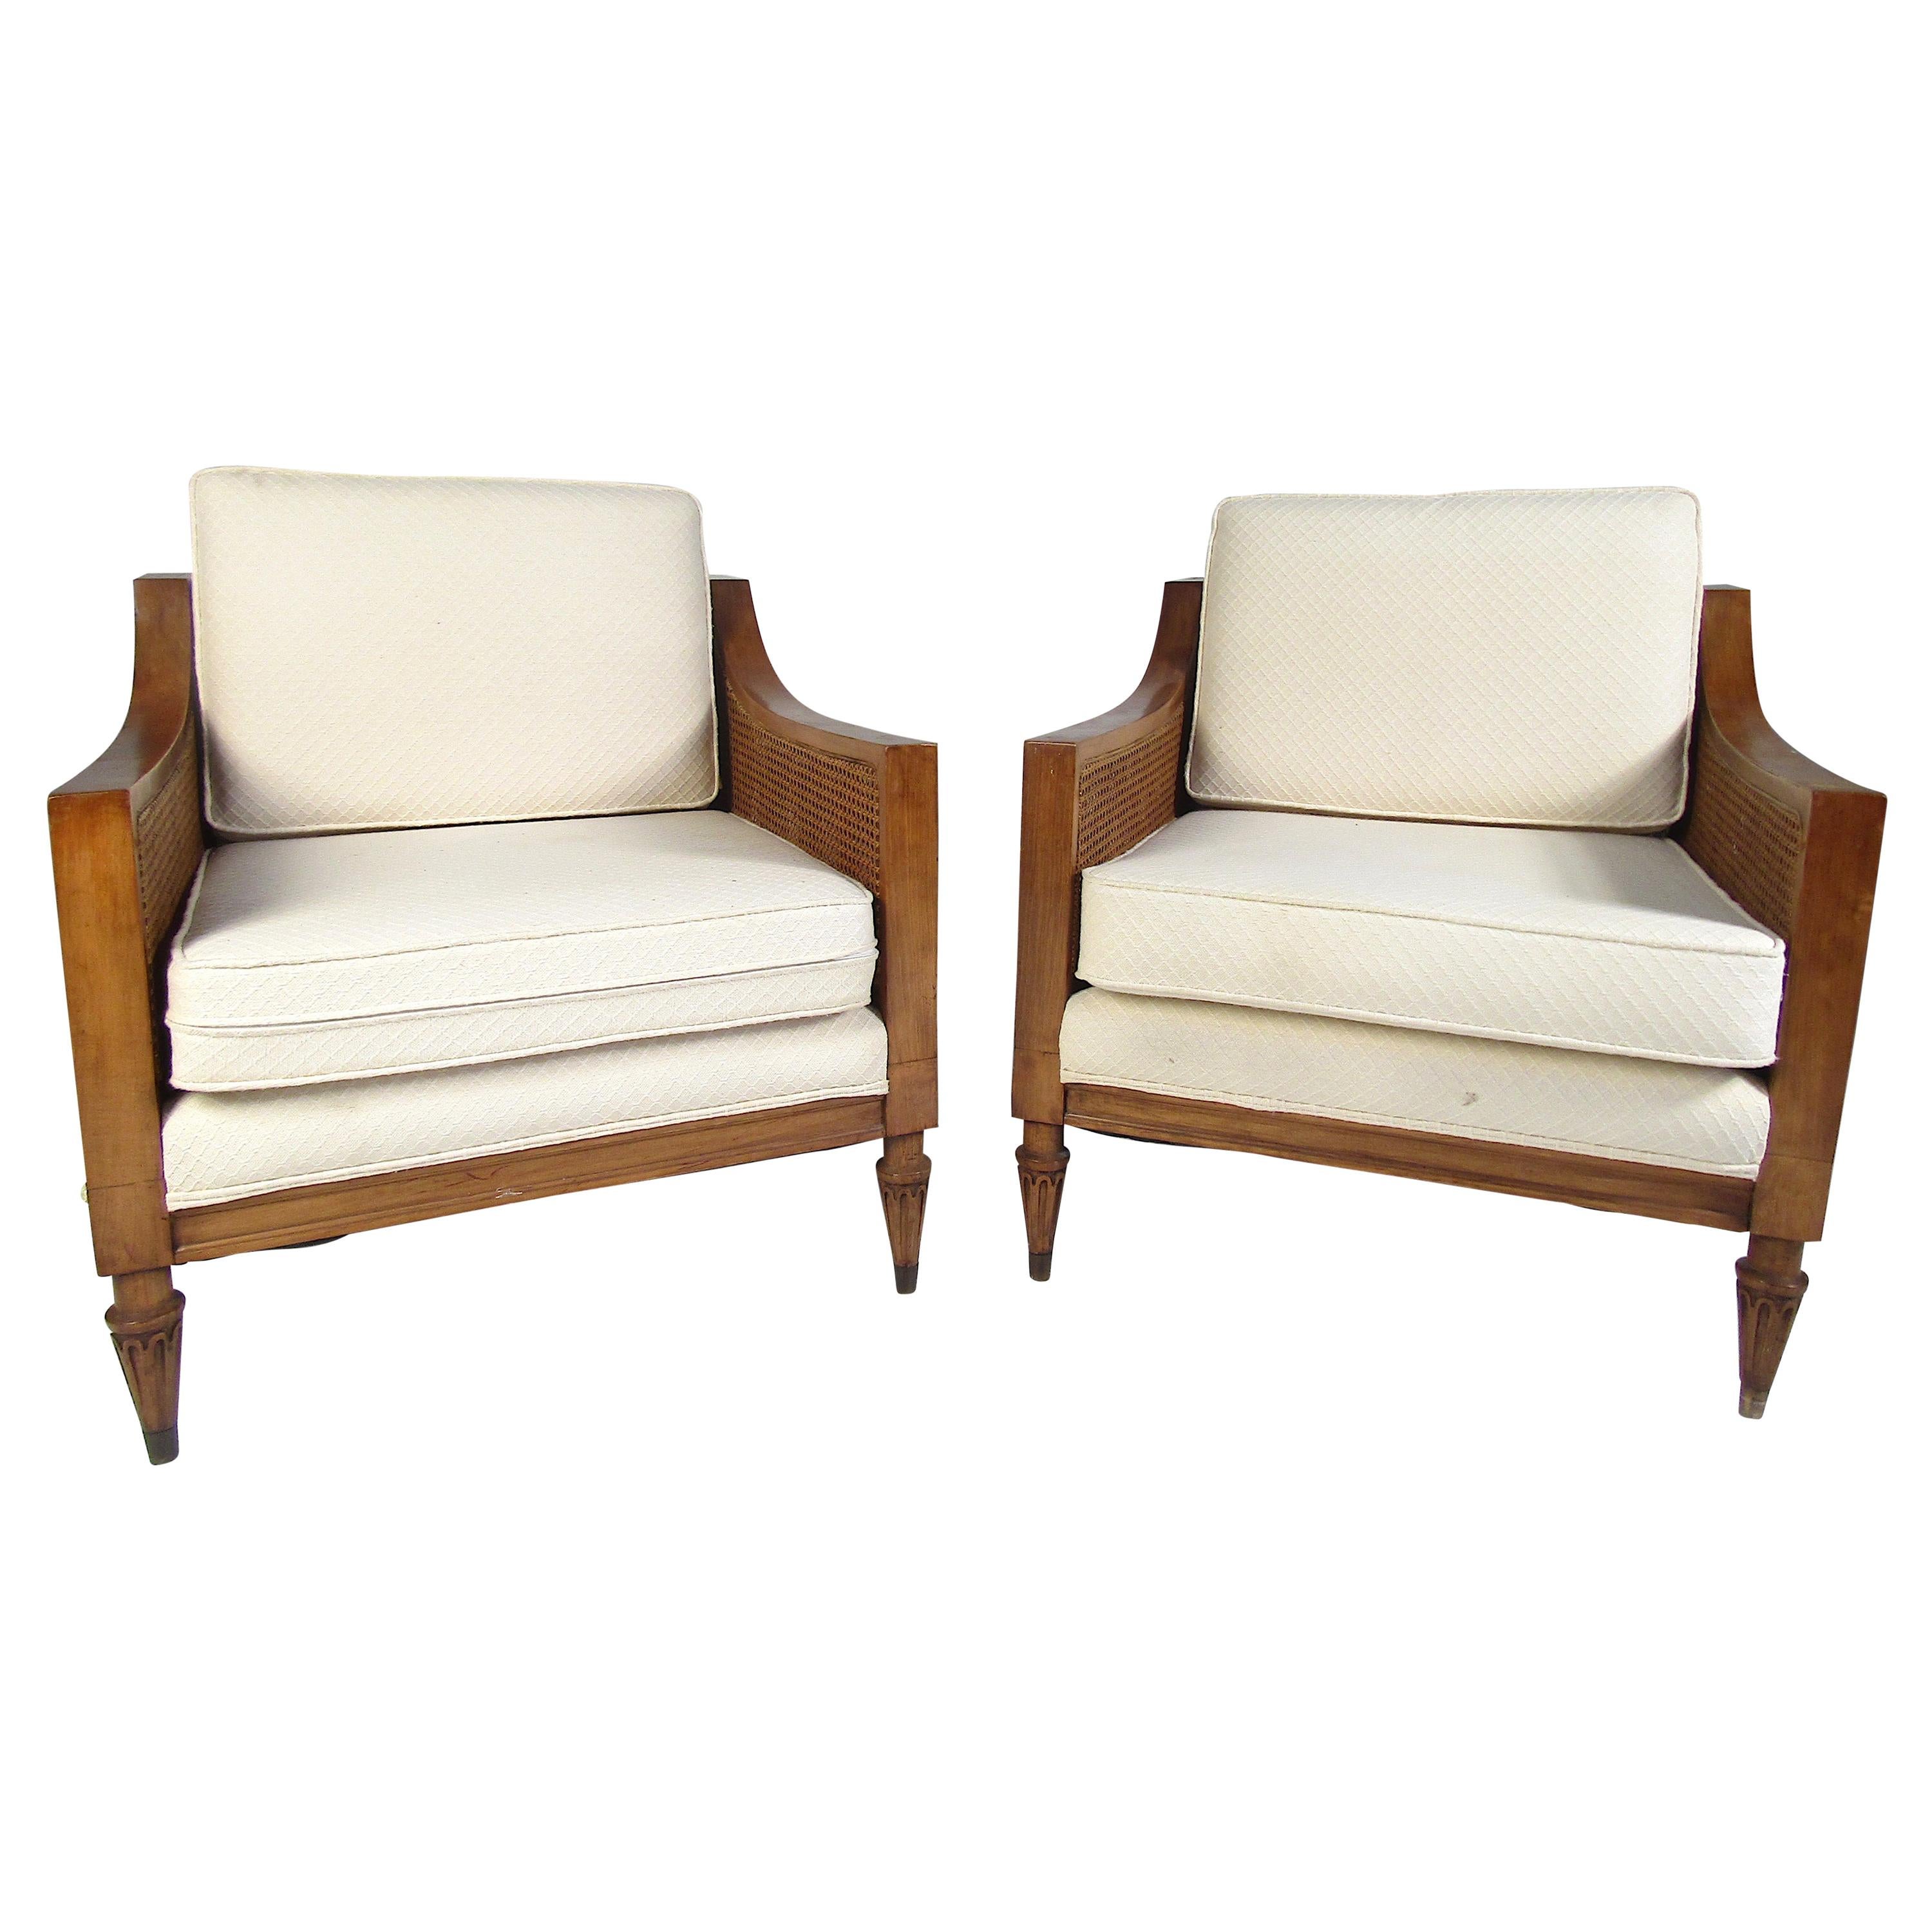 This beautiful pair of vintage lounge chairs feature cane sides and a sturdy walnut frame. The thick padded cushions with off-white upholstery and sloped armrests ensure maximum comfort. This sleek pair of armchairs make the perfect addition to any